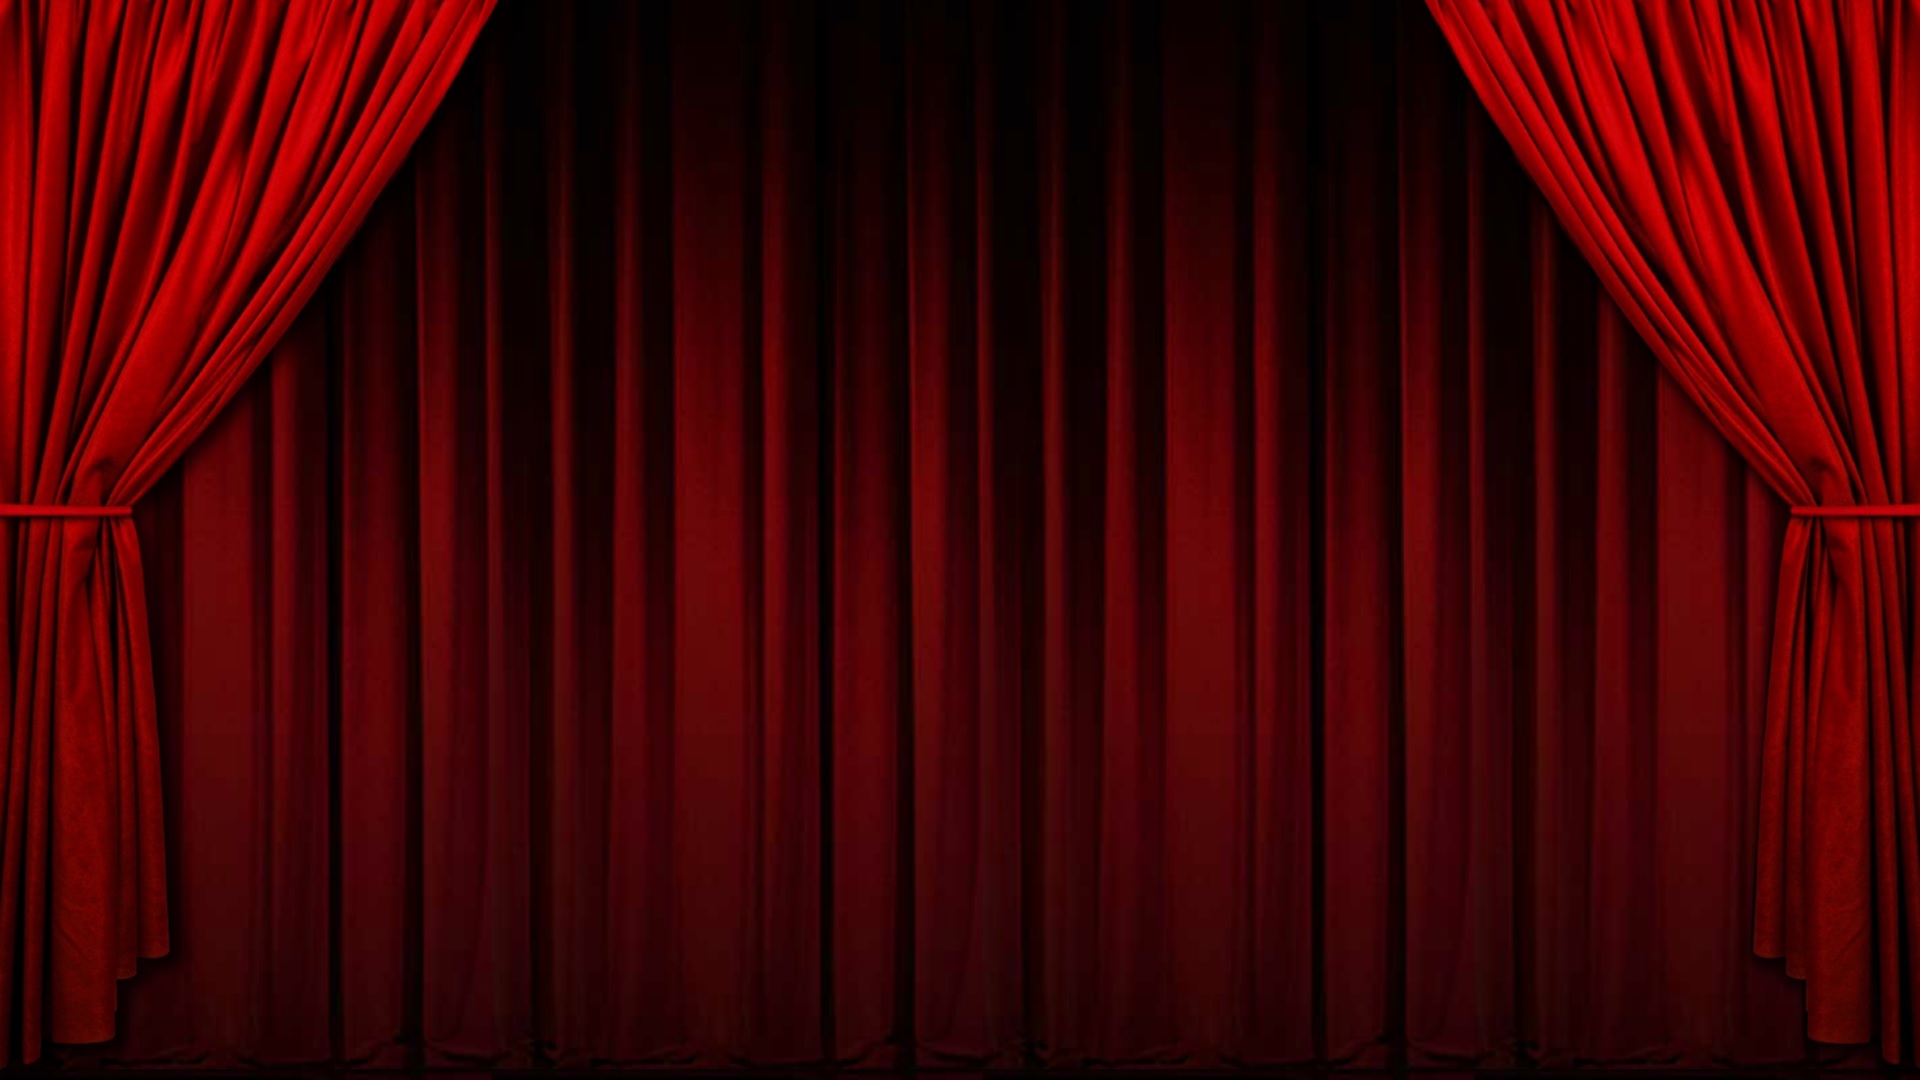 Find The Red Curtains Background Sparkbooth Questions